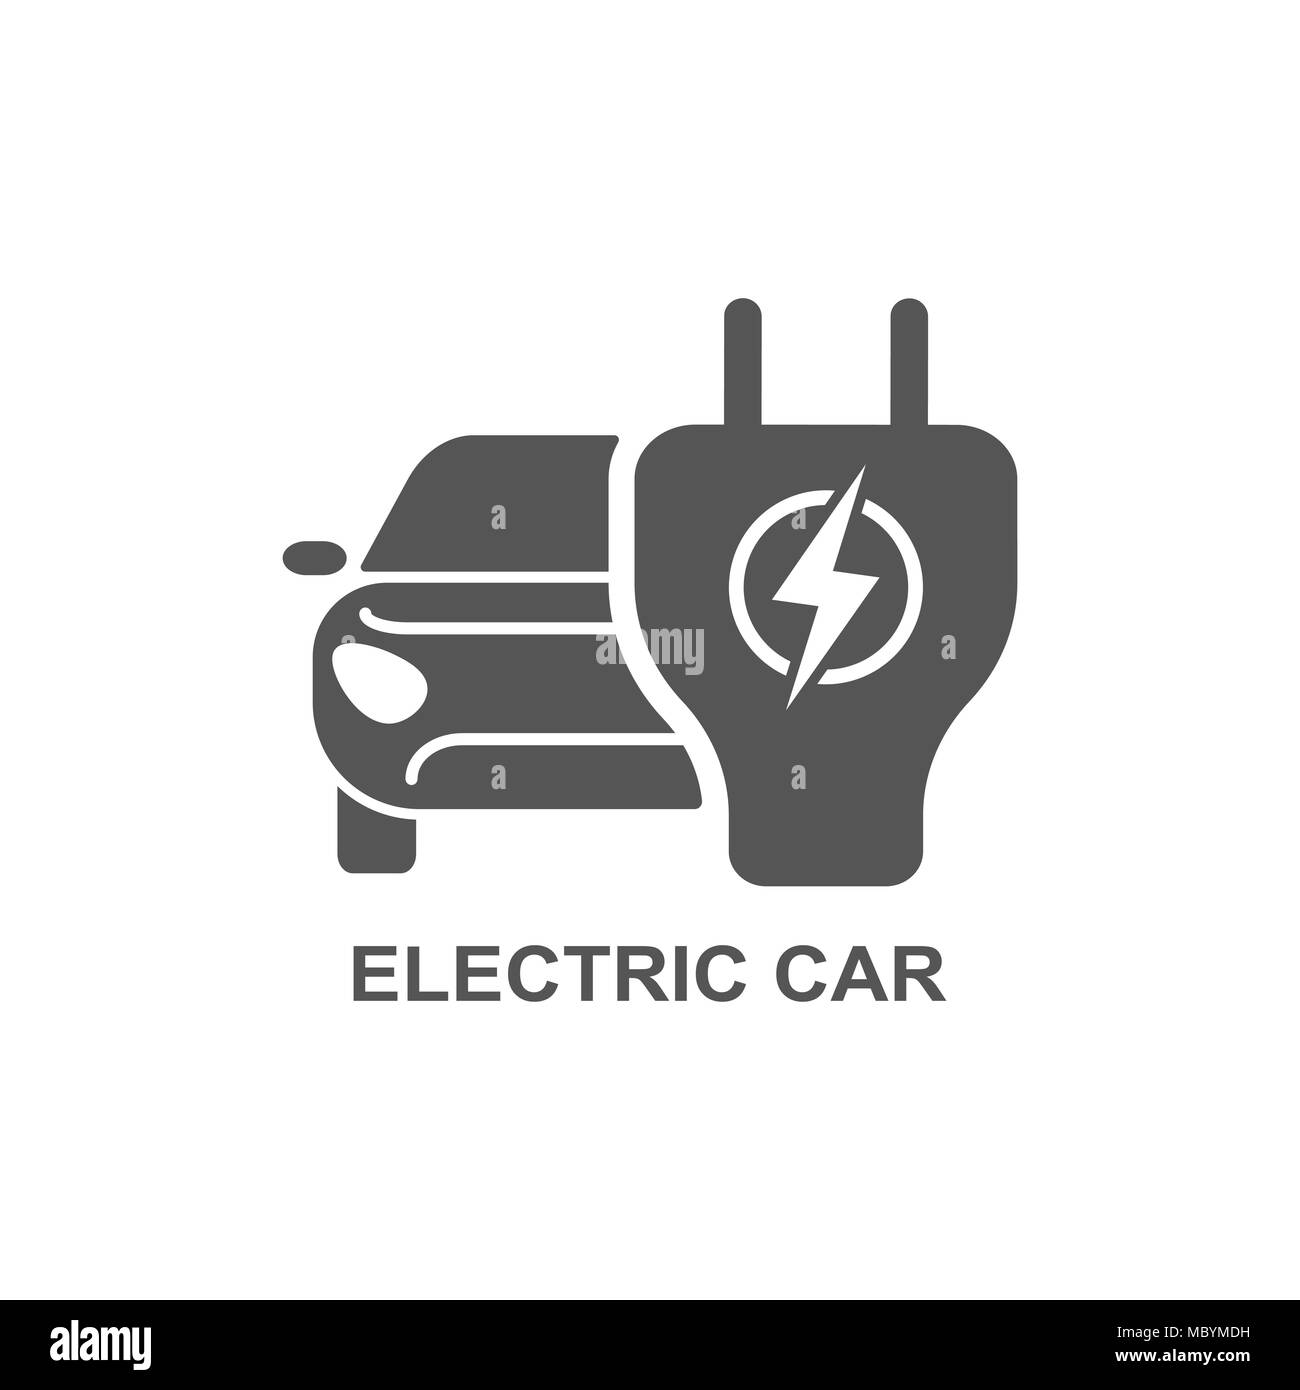 Electro car. Simple Related Vector Icon Set for Video, Mobile Apps, Web Sites, Print Projects and Your Design. Flat Illustration on White Background Stock Vector